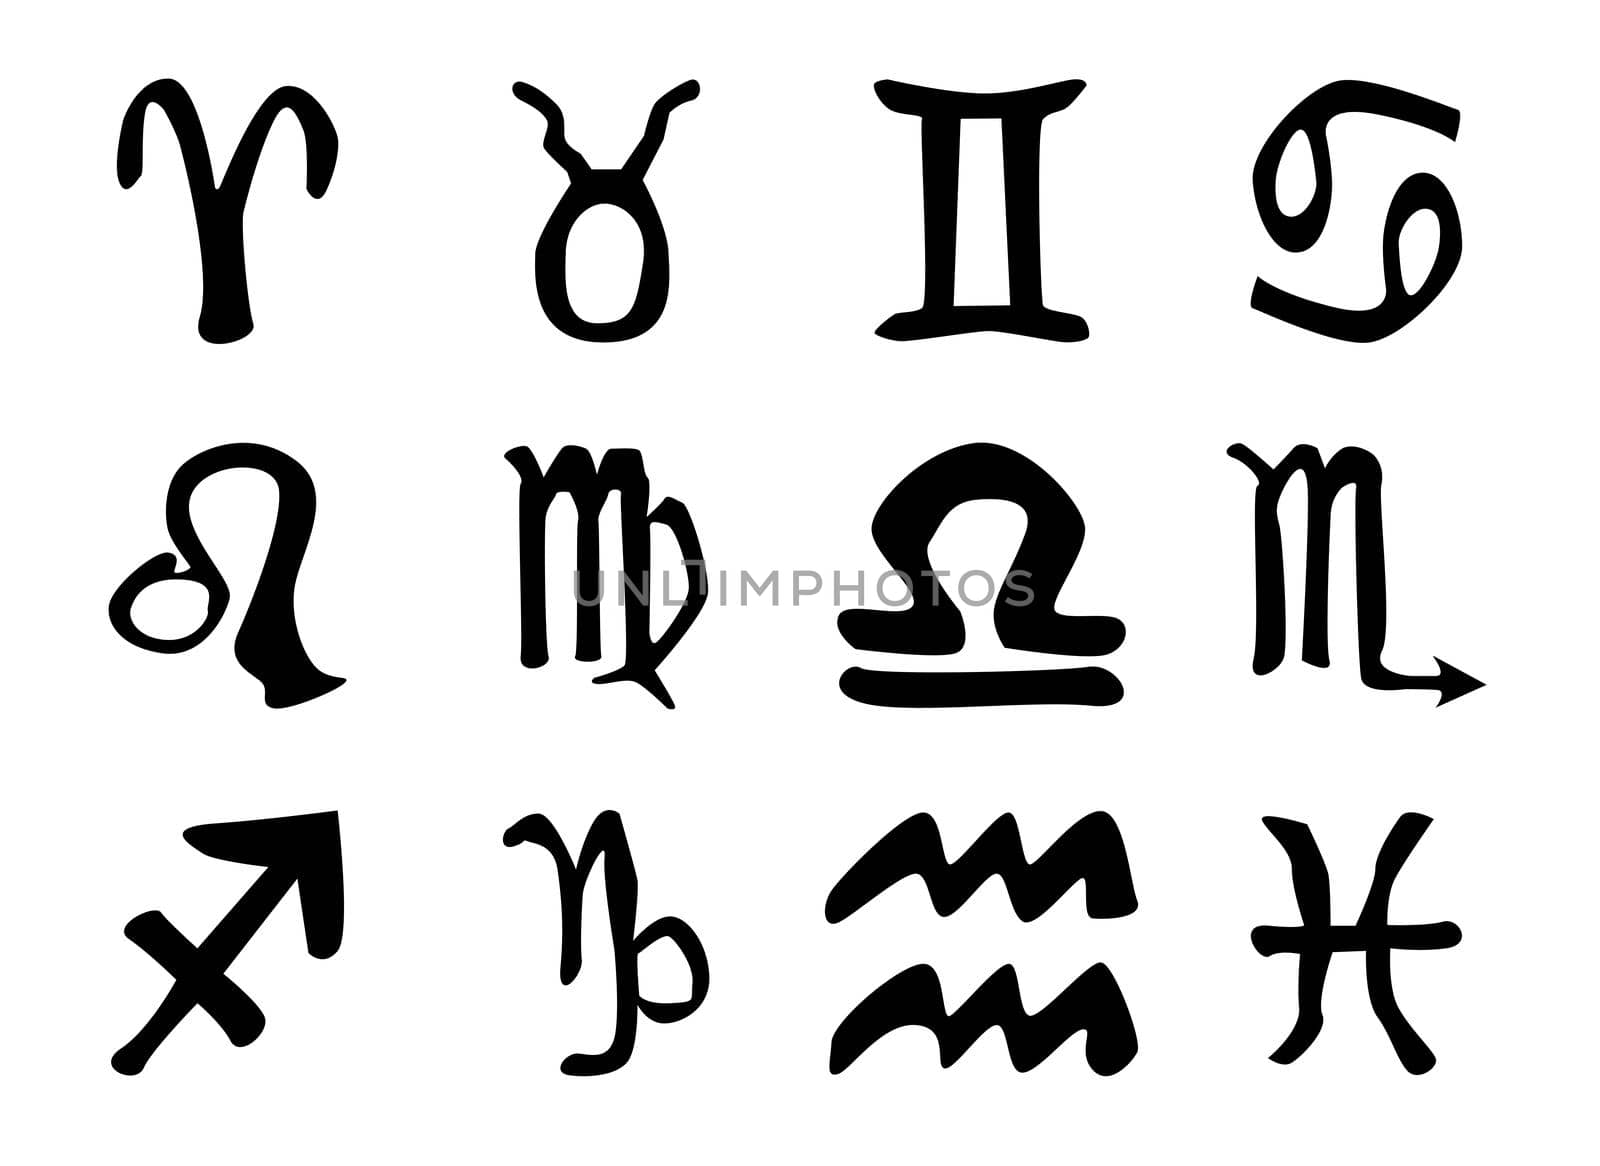 A collection of the twelve astrology sun signs isolated on white.